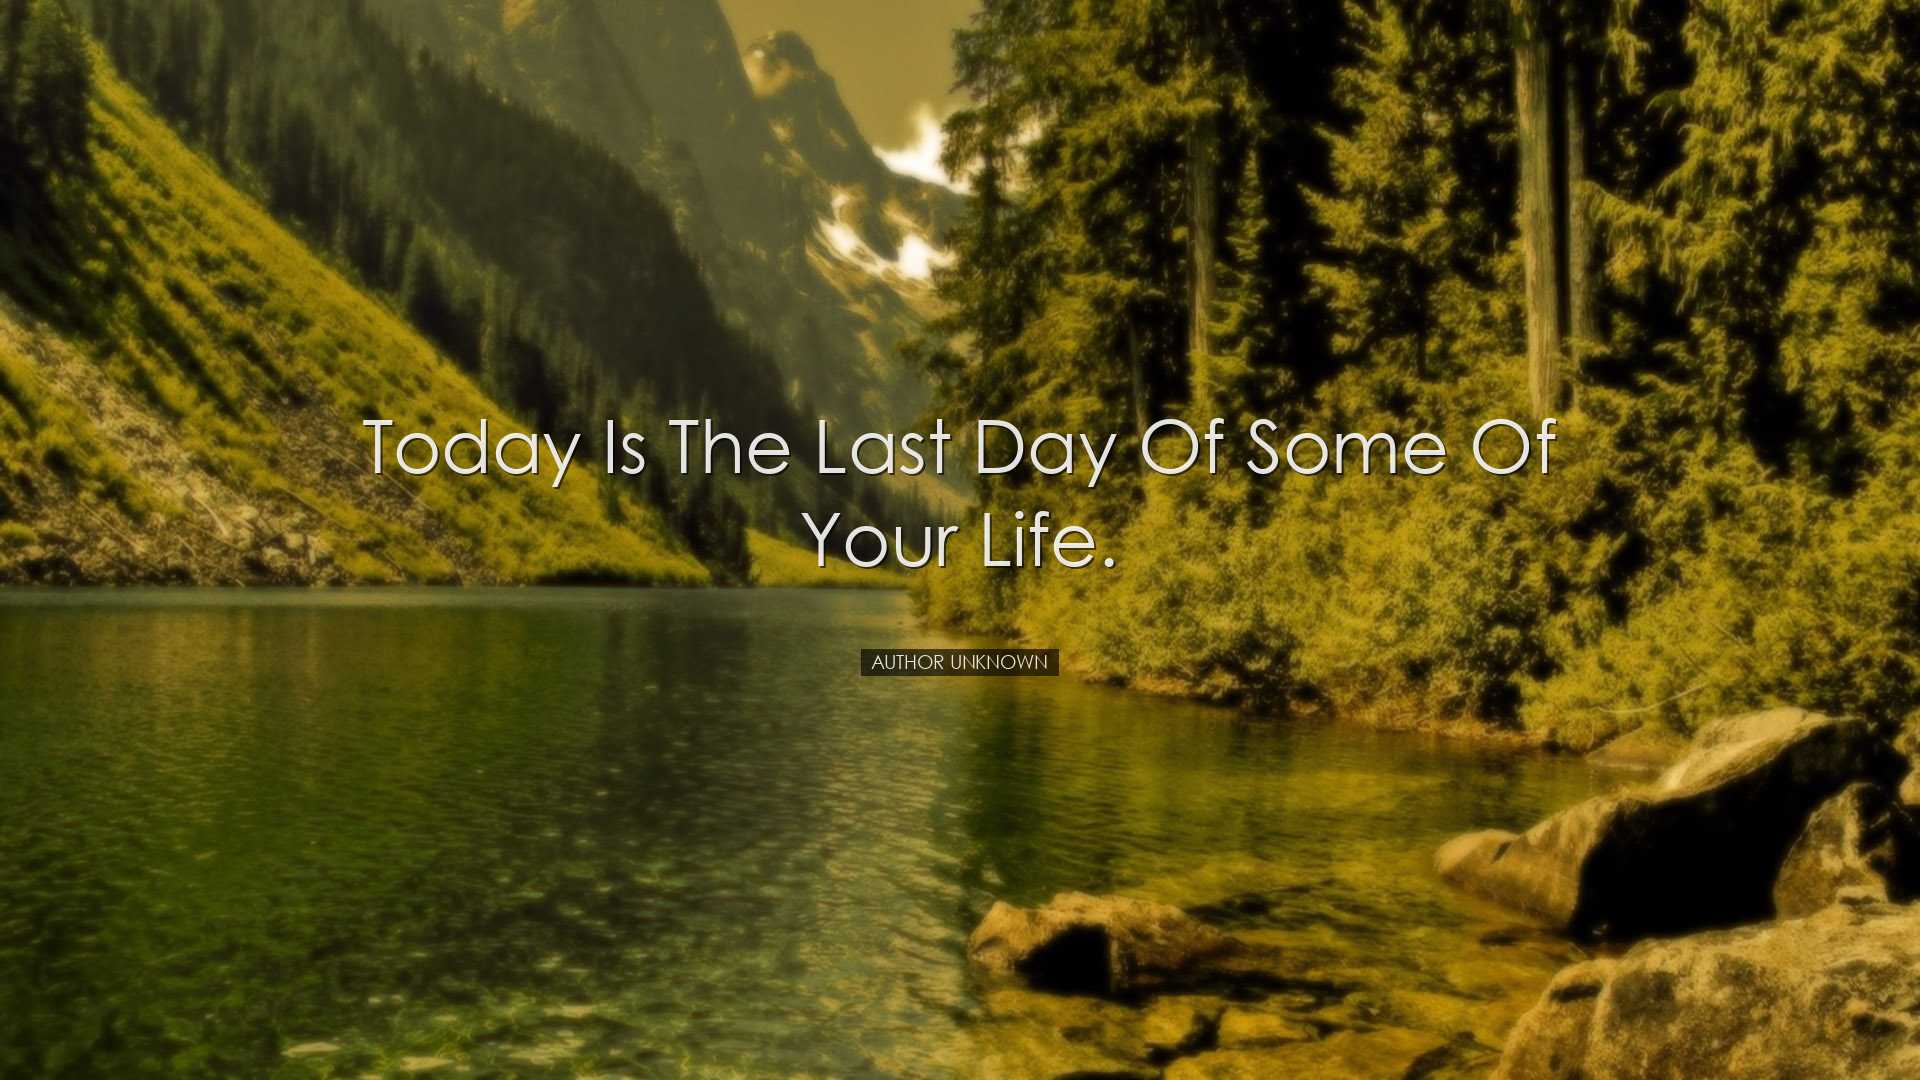 Today is the last day of some of your life. - Author Unknown